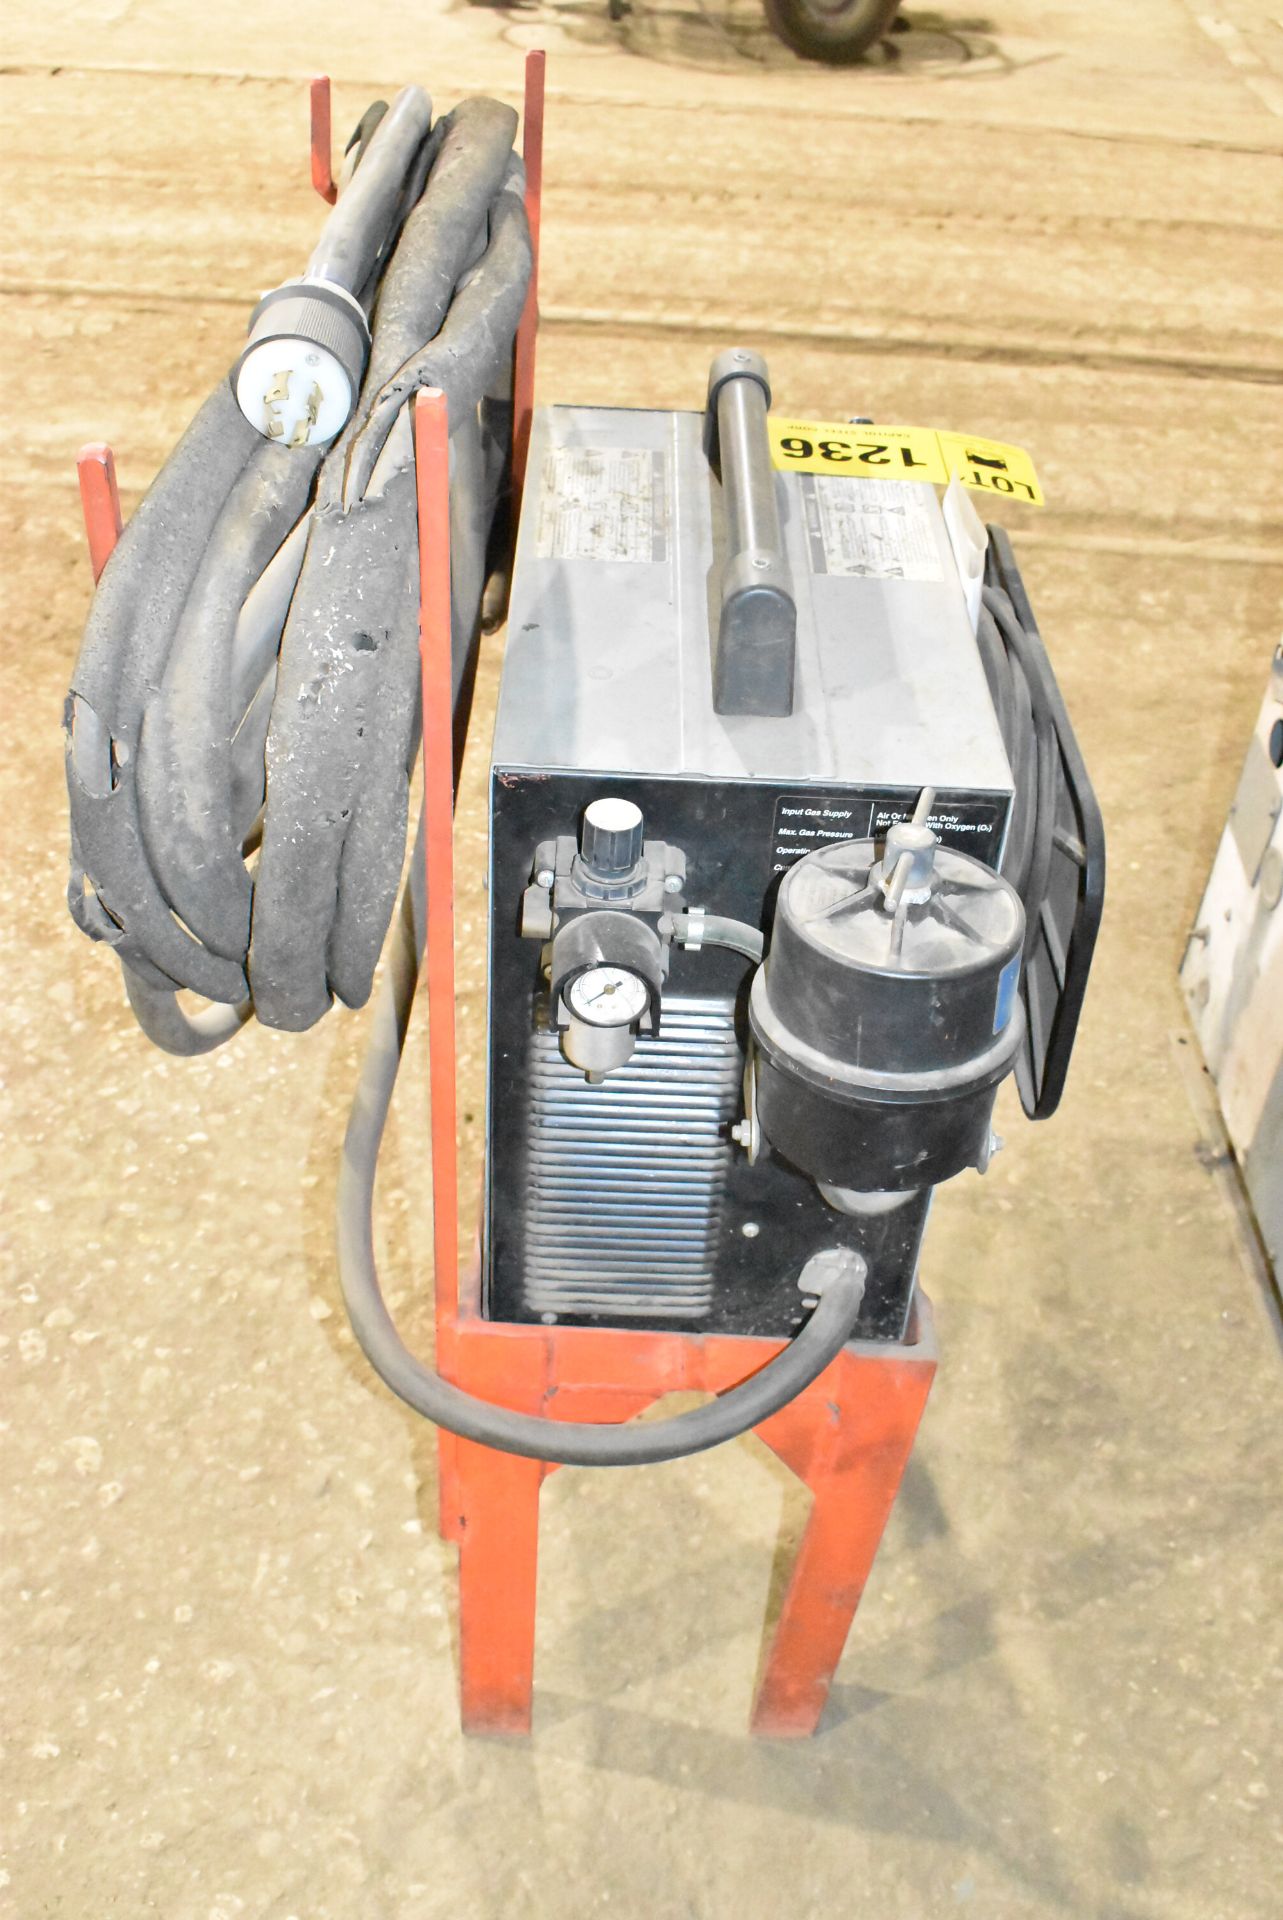 THERMAL DYNAMICS PAK MASTER 100XL PORTABLE PLASMA CUTTER WITH CABLES & GUN, S/N: N/A [RIGGING FEES - Image 5 of 8